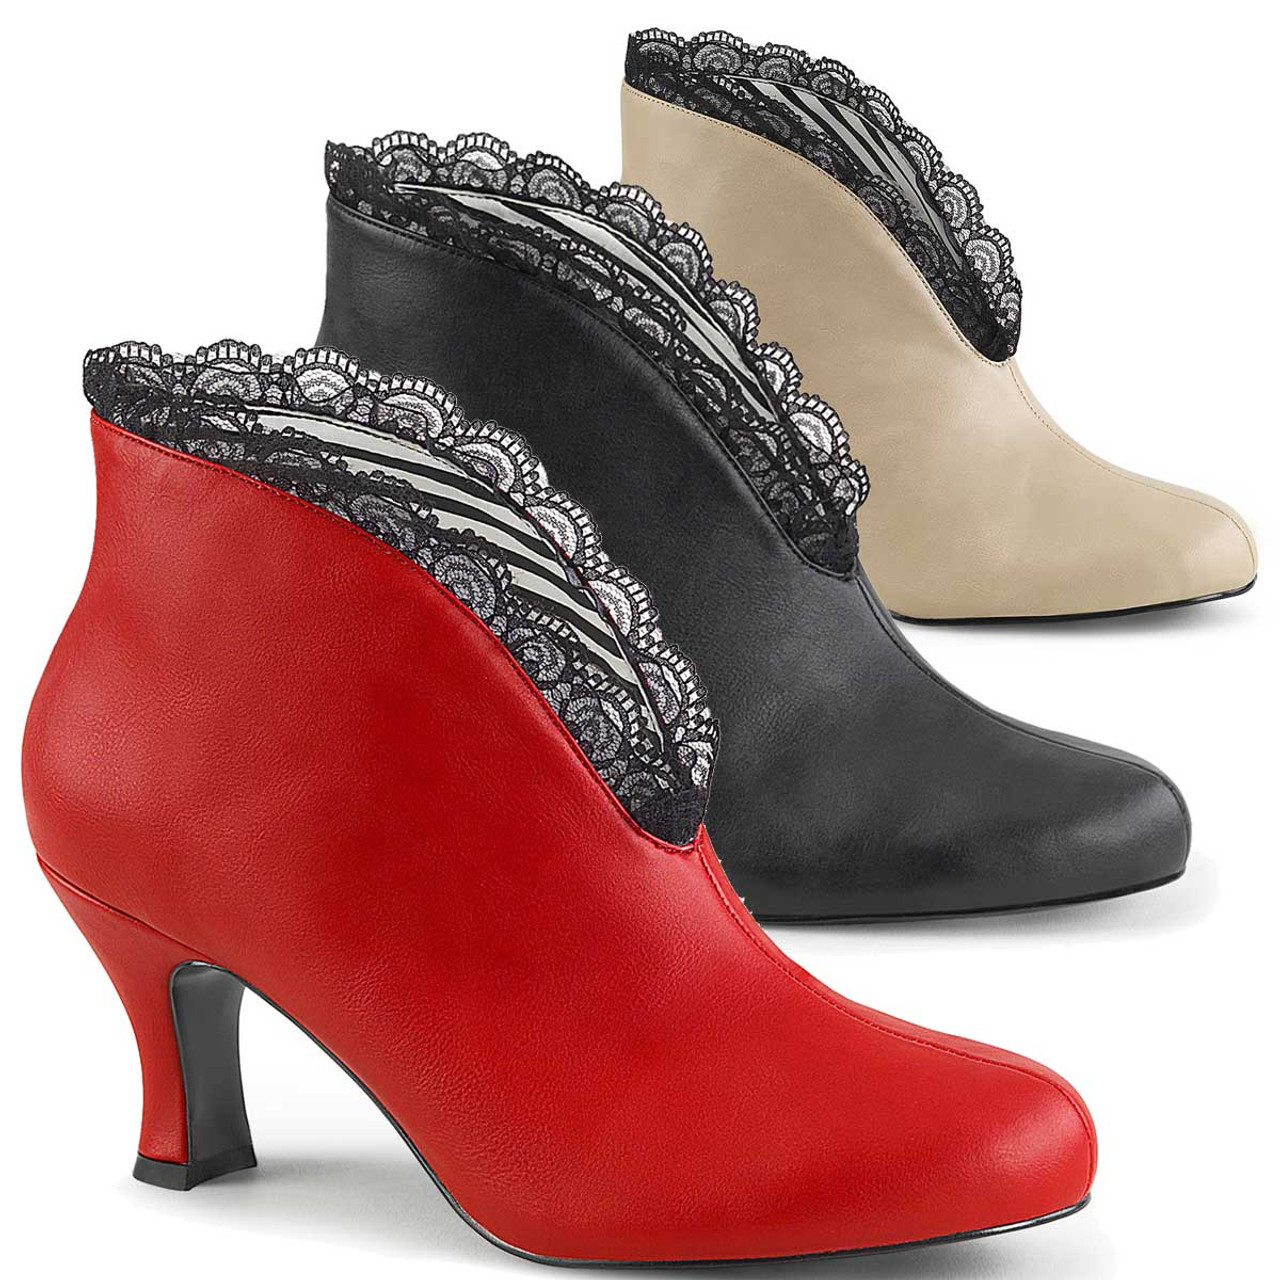 Plus-size Ankle Boots | Custom black ankle high heel booties